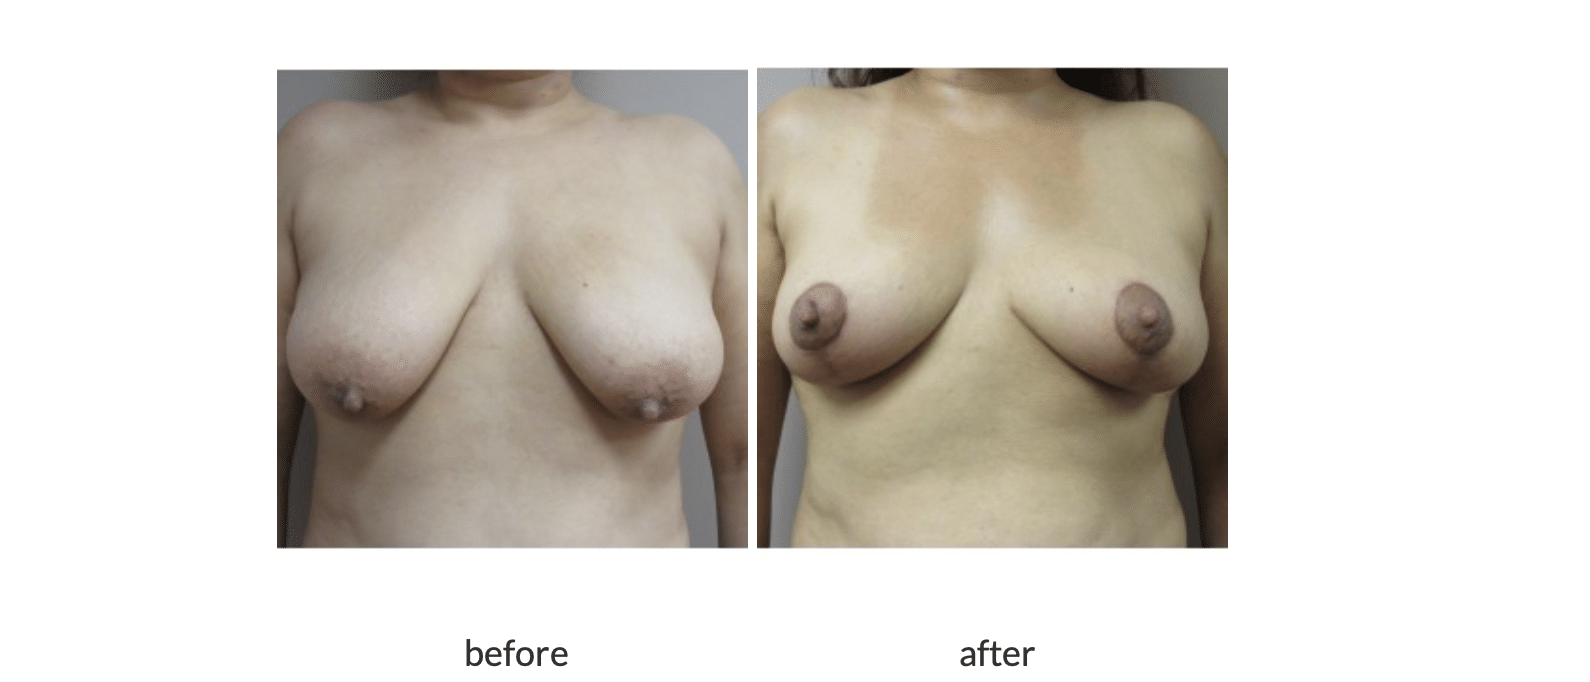 Breast reduction before and after